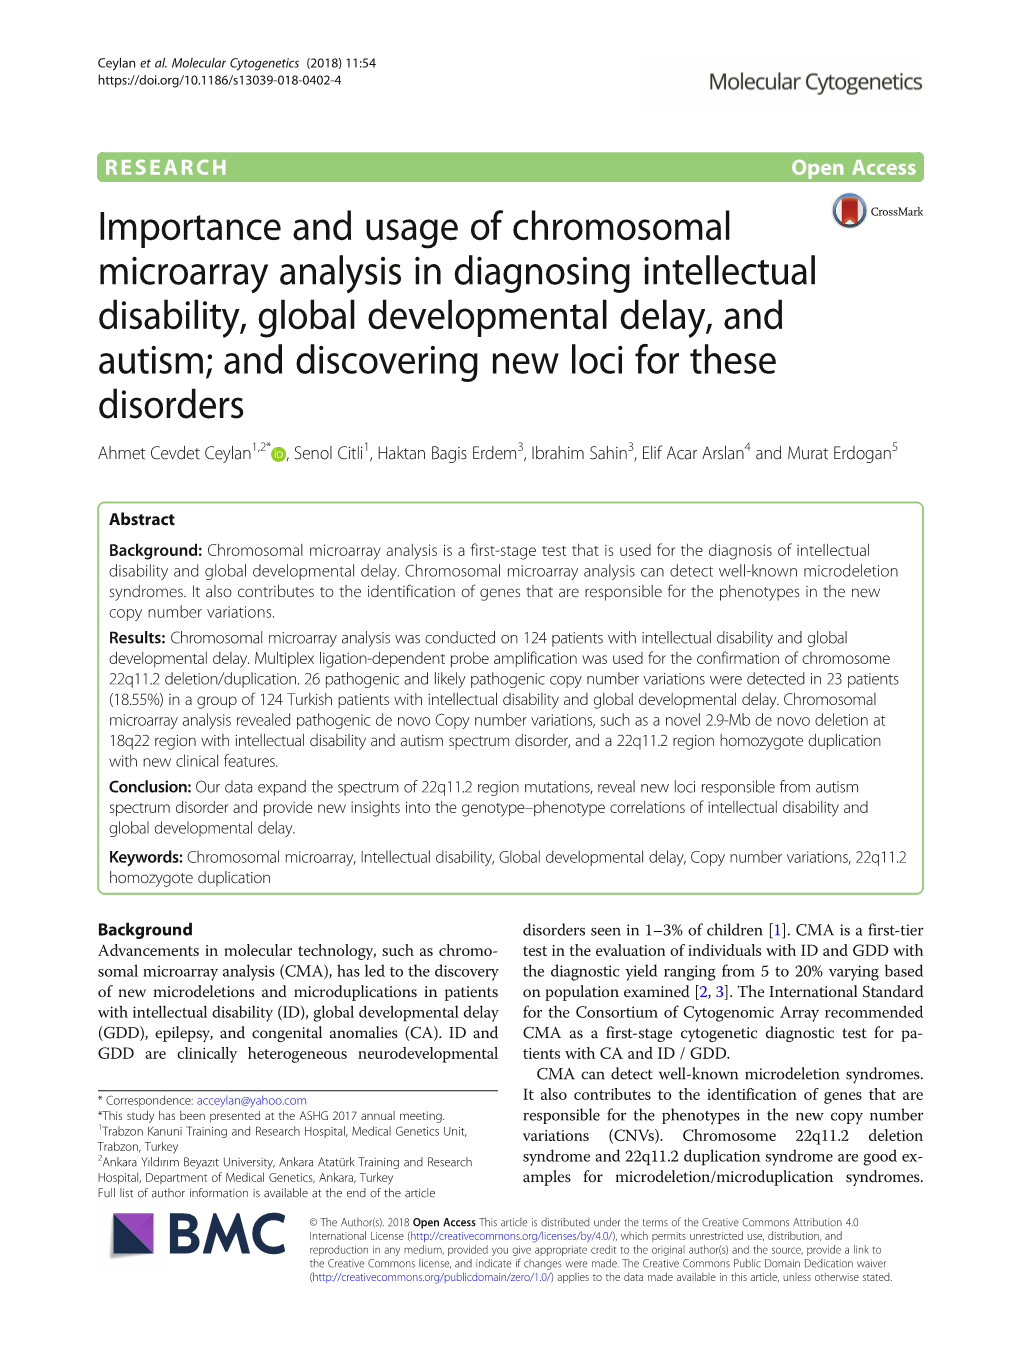 Importance and Usage of Chromosomal Microarray Analysis